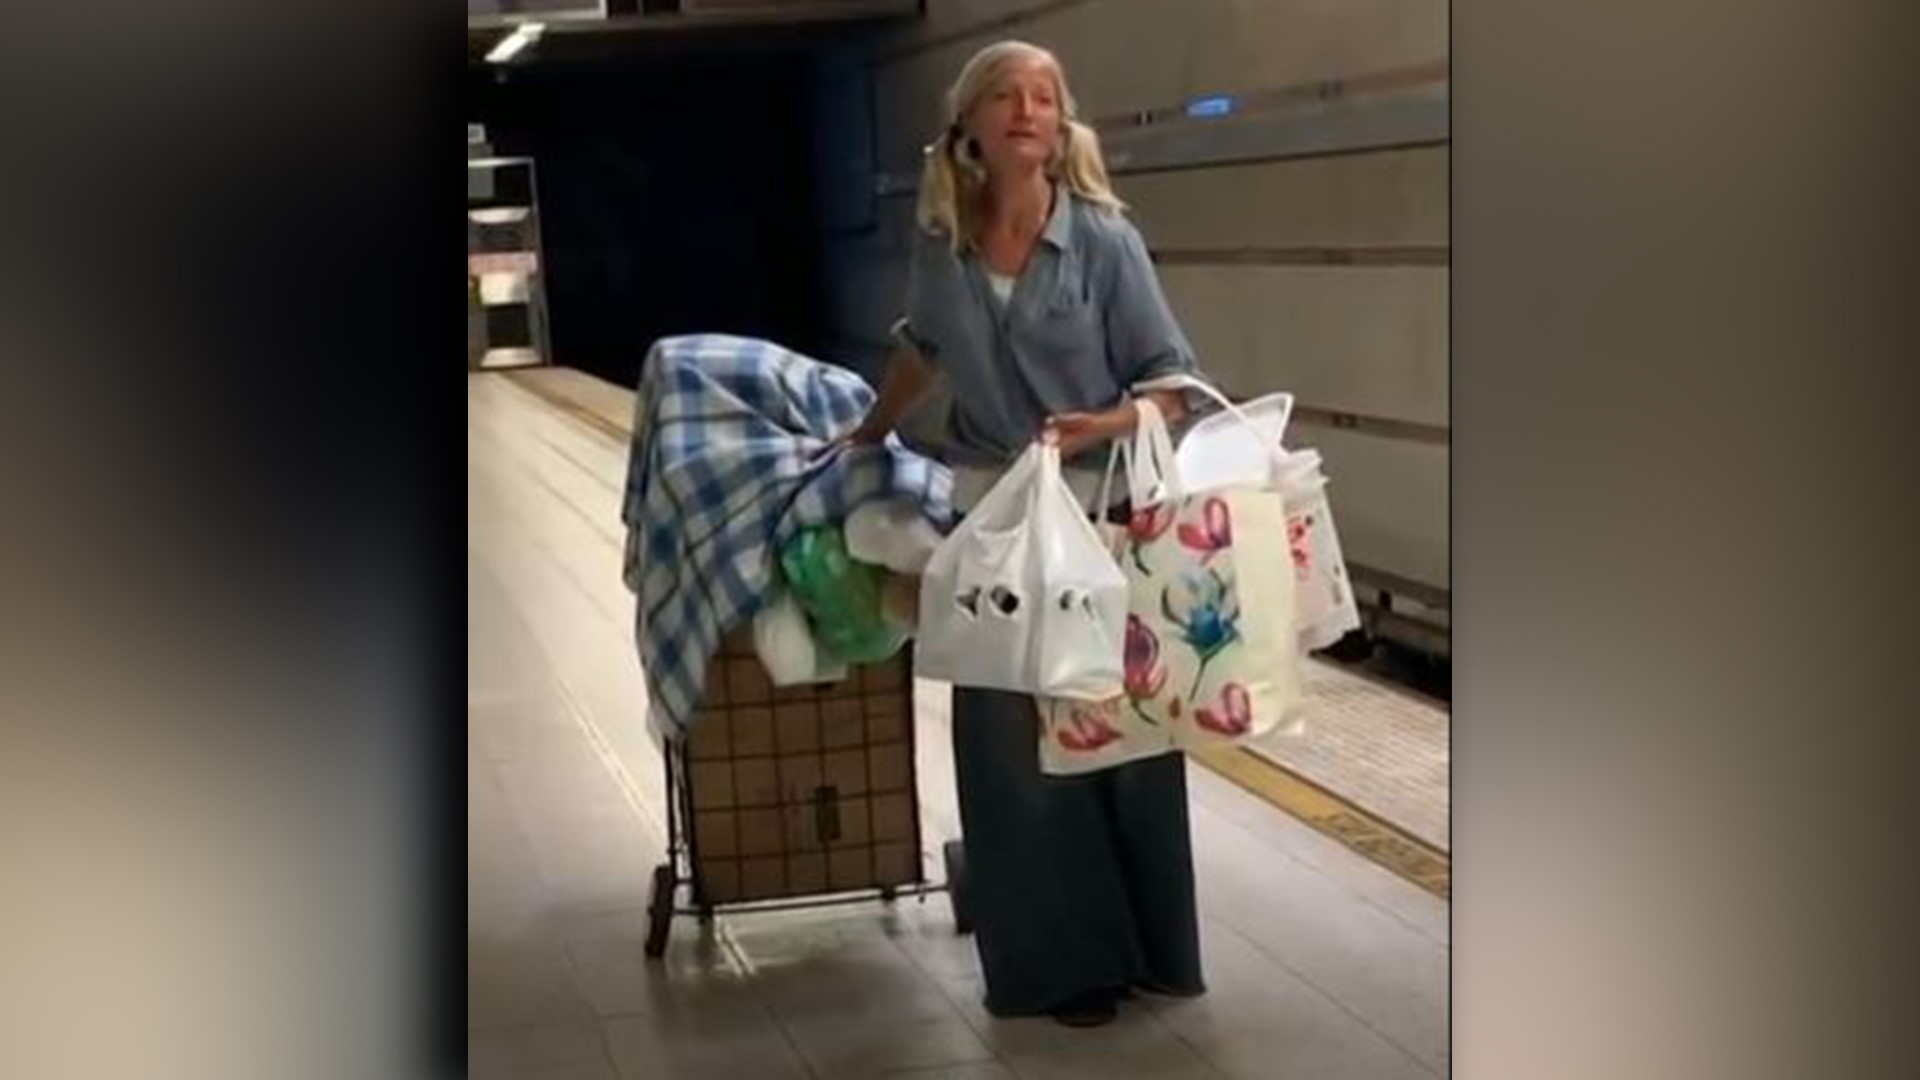 A Los Angeles police officer was captivated by the soprano singing voice of a homeless woman who singing in a Los Angeles subway station. (LAPD)